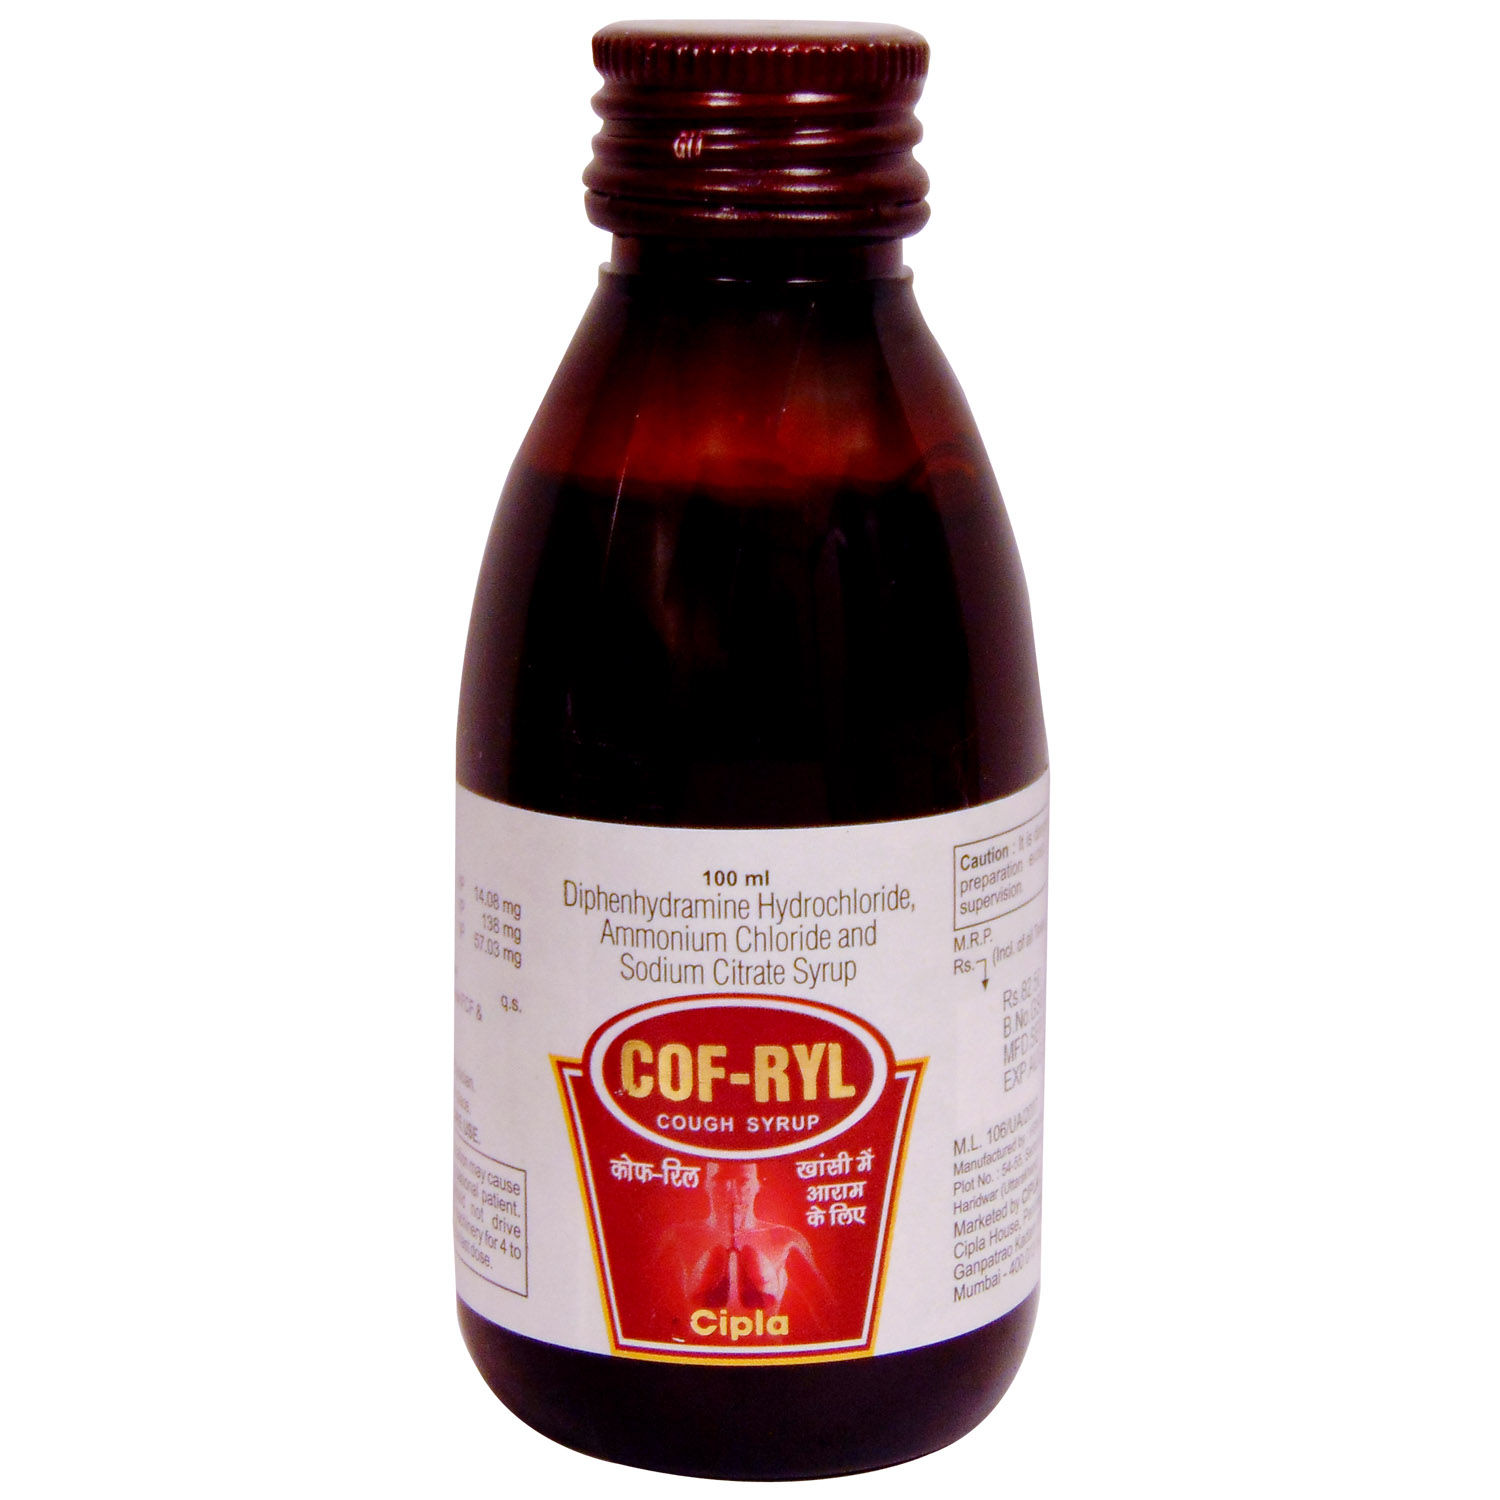 Buy COF-RYL Cough Syrup 100 ml Online